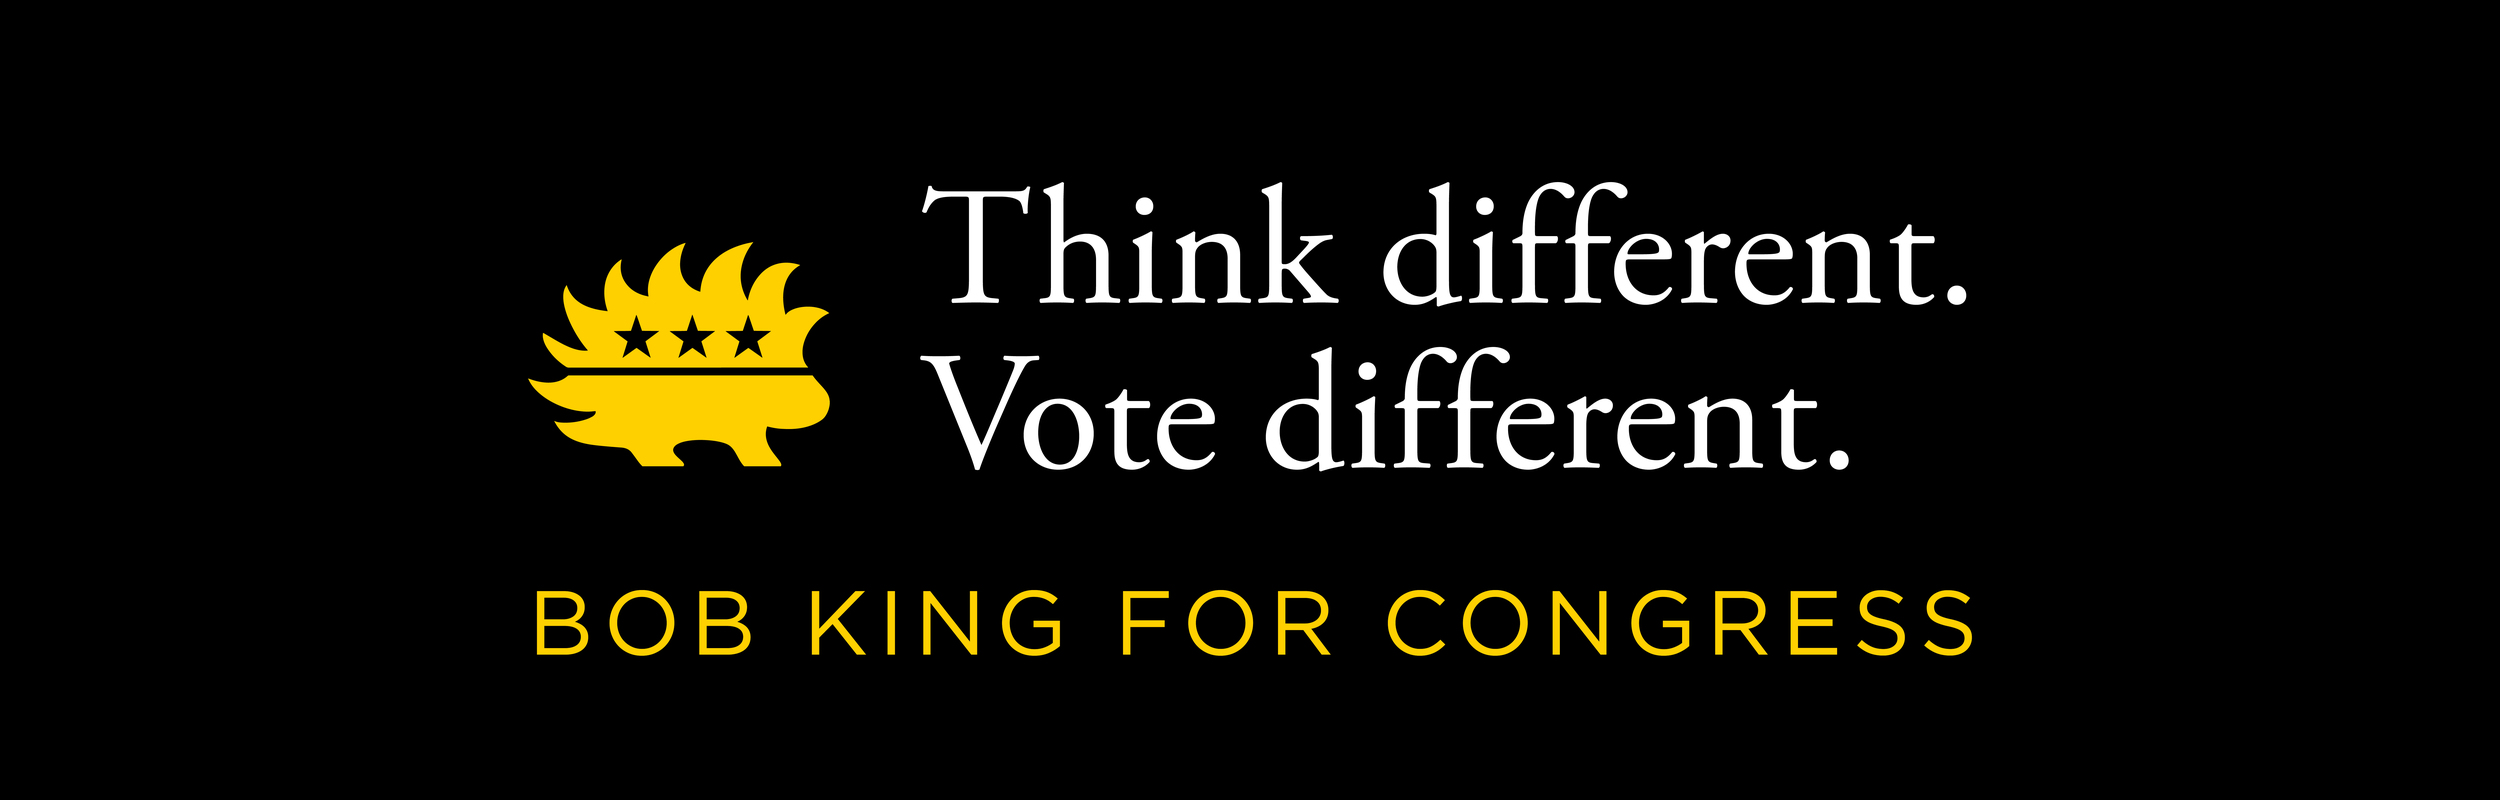 Think different. Vote different. Bob King for Congress